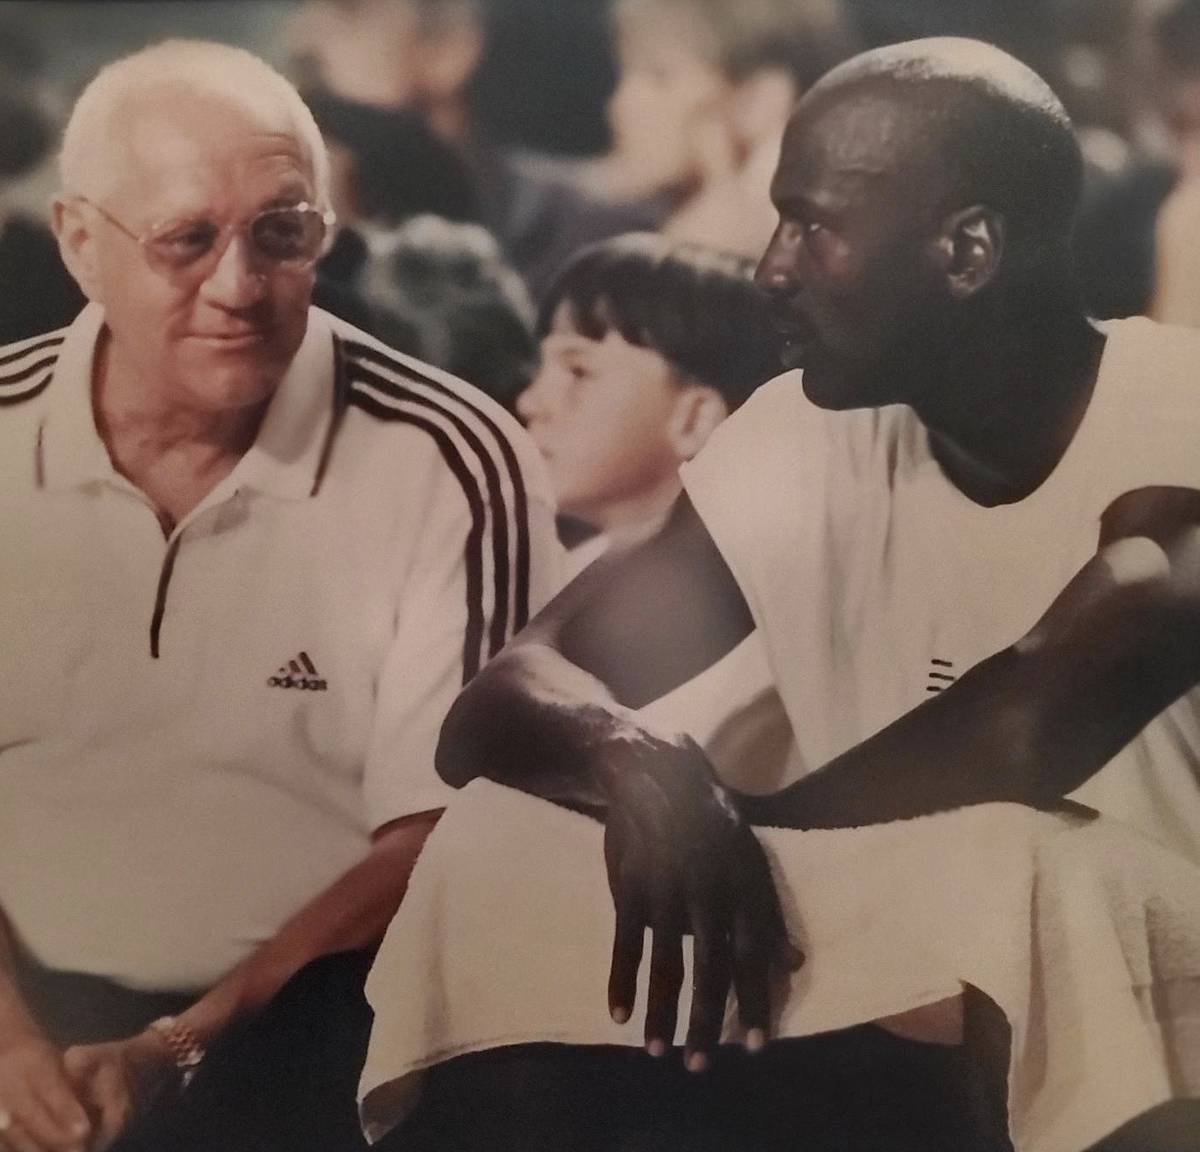 Jerry Tarkanian is shown with Michael Jordan in this undated photo. (Freddie Glusman)